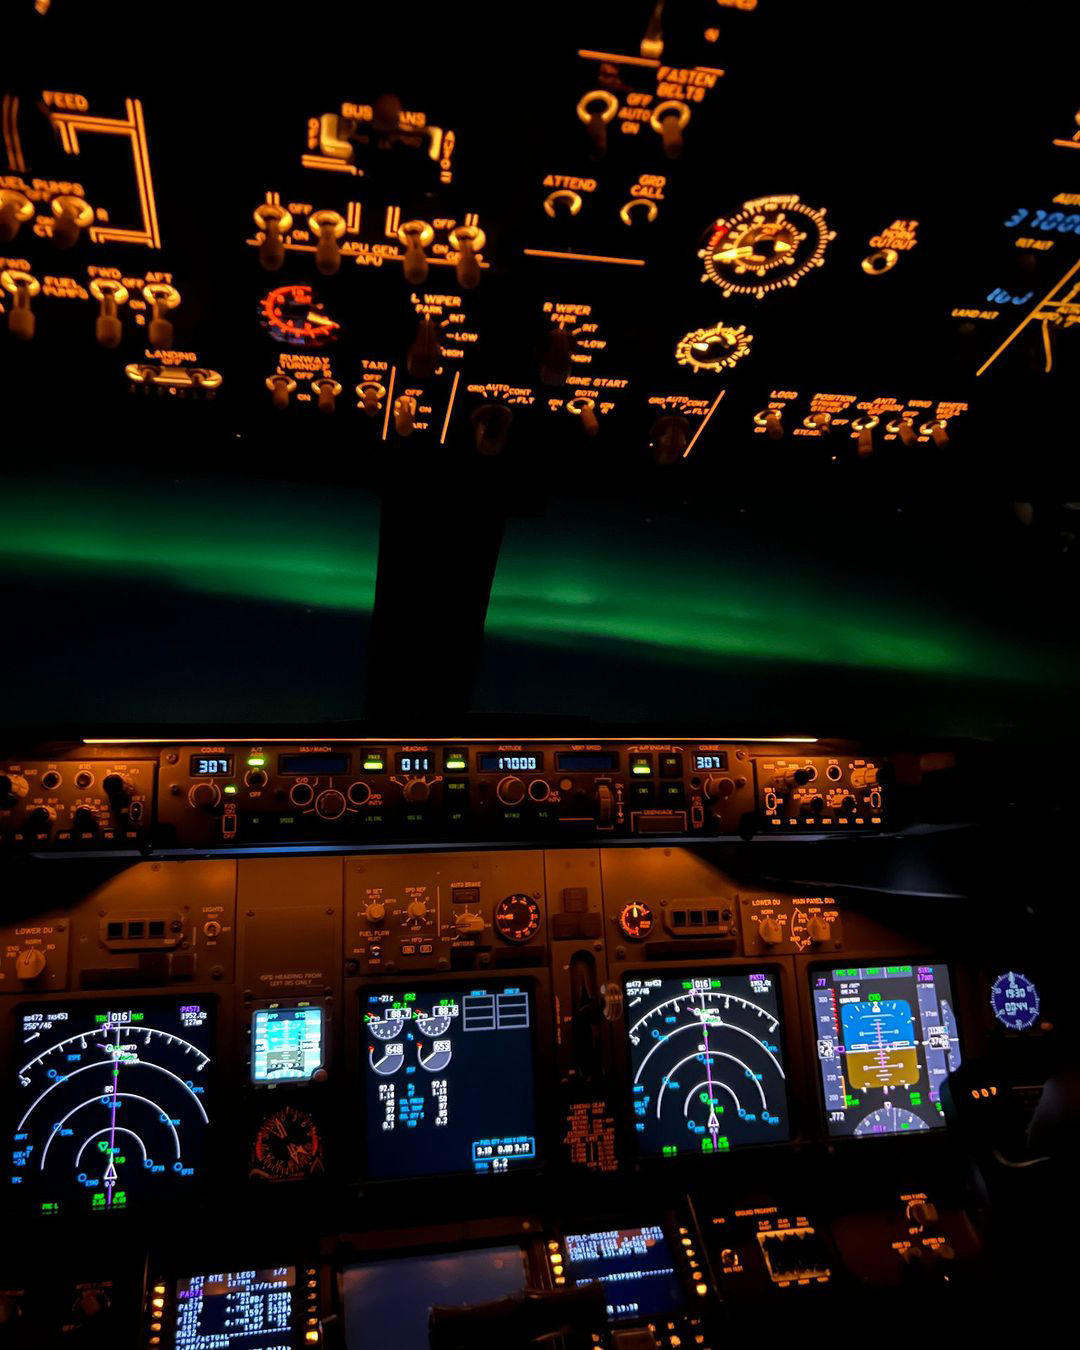 image  1 Just when you thought flying couldn't get any more magical, one of our crew on board captured the st